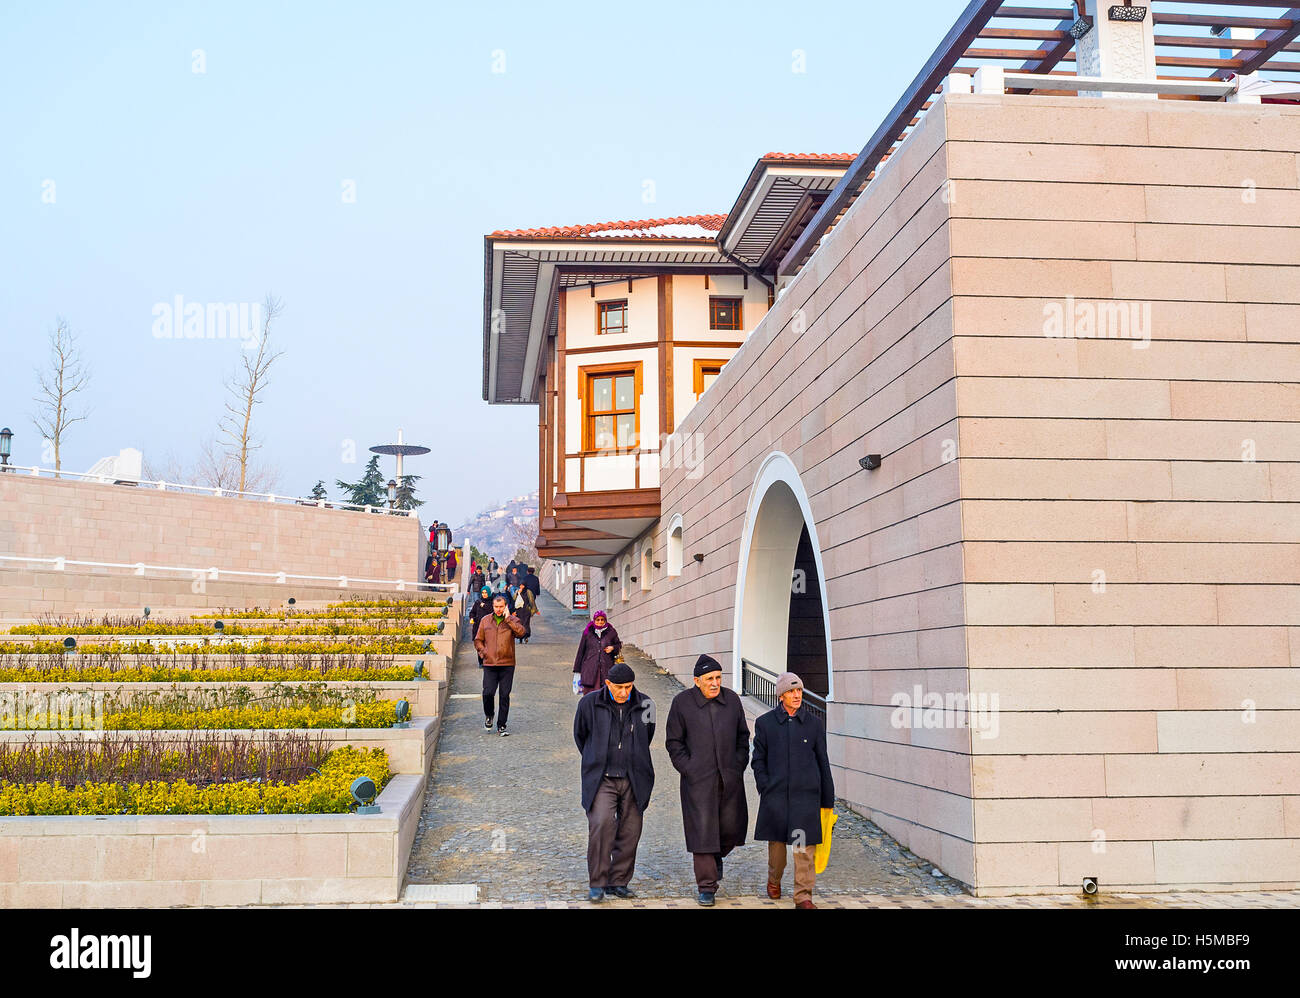 The tourists and locals leave the Haci Bayram Mosque, walking along the modern street with green flower beds Stock Photo